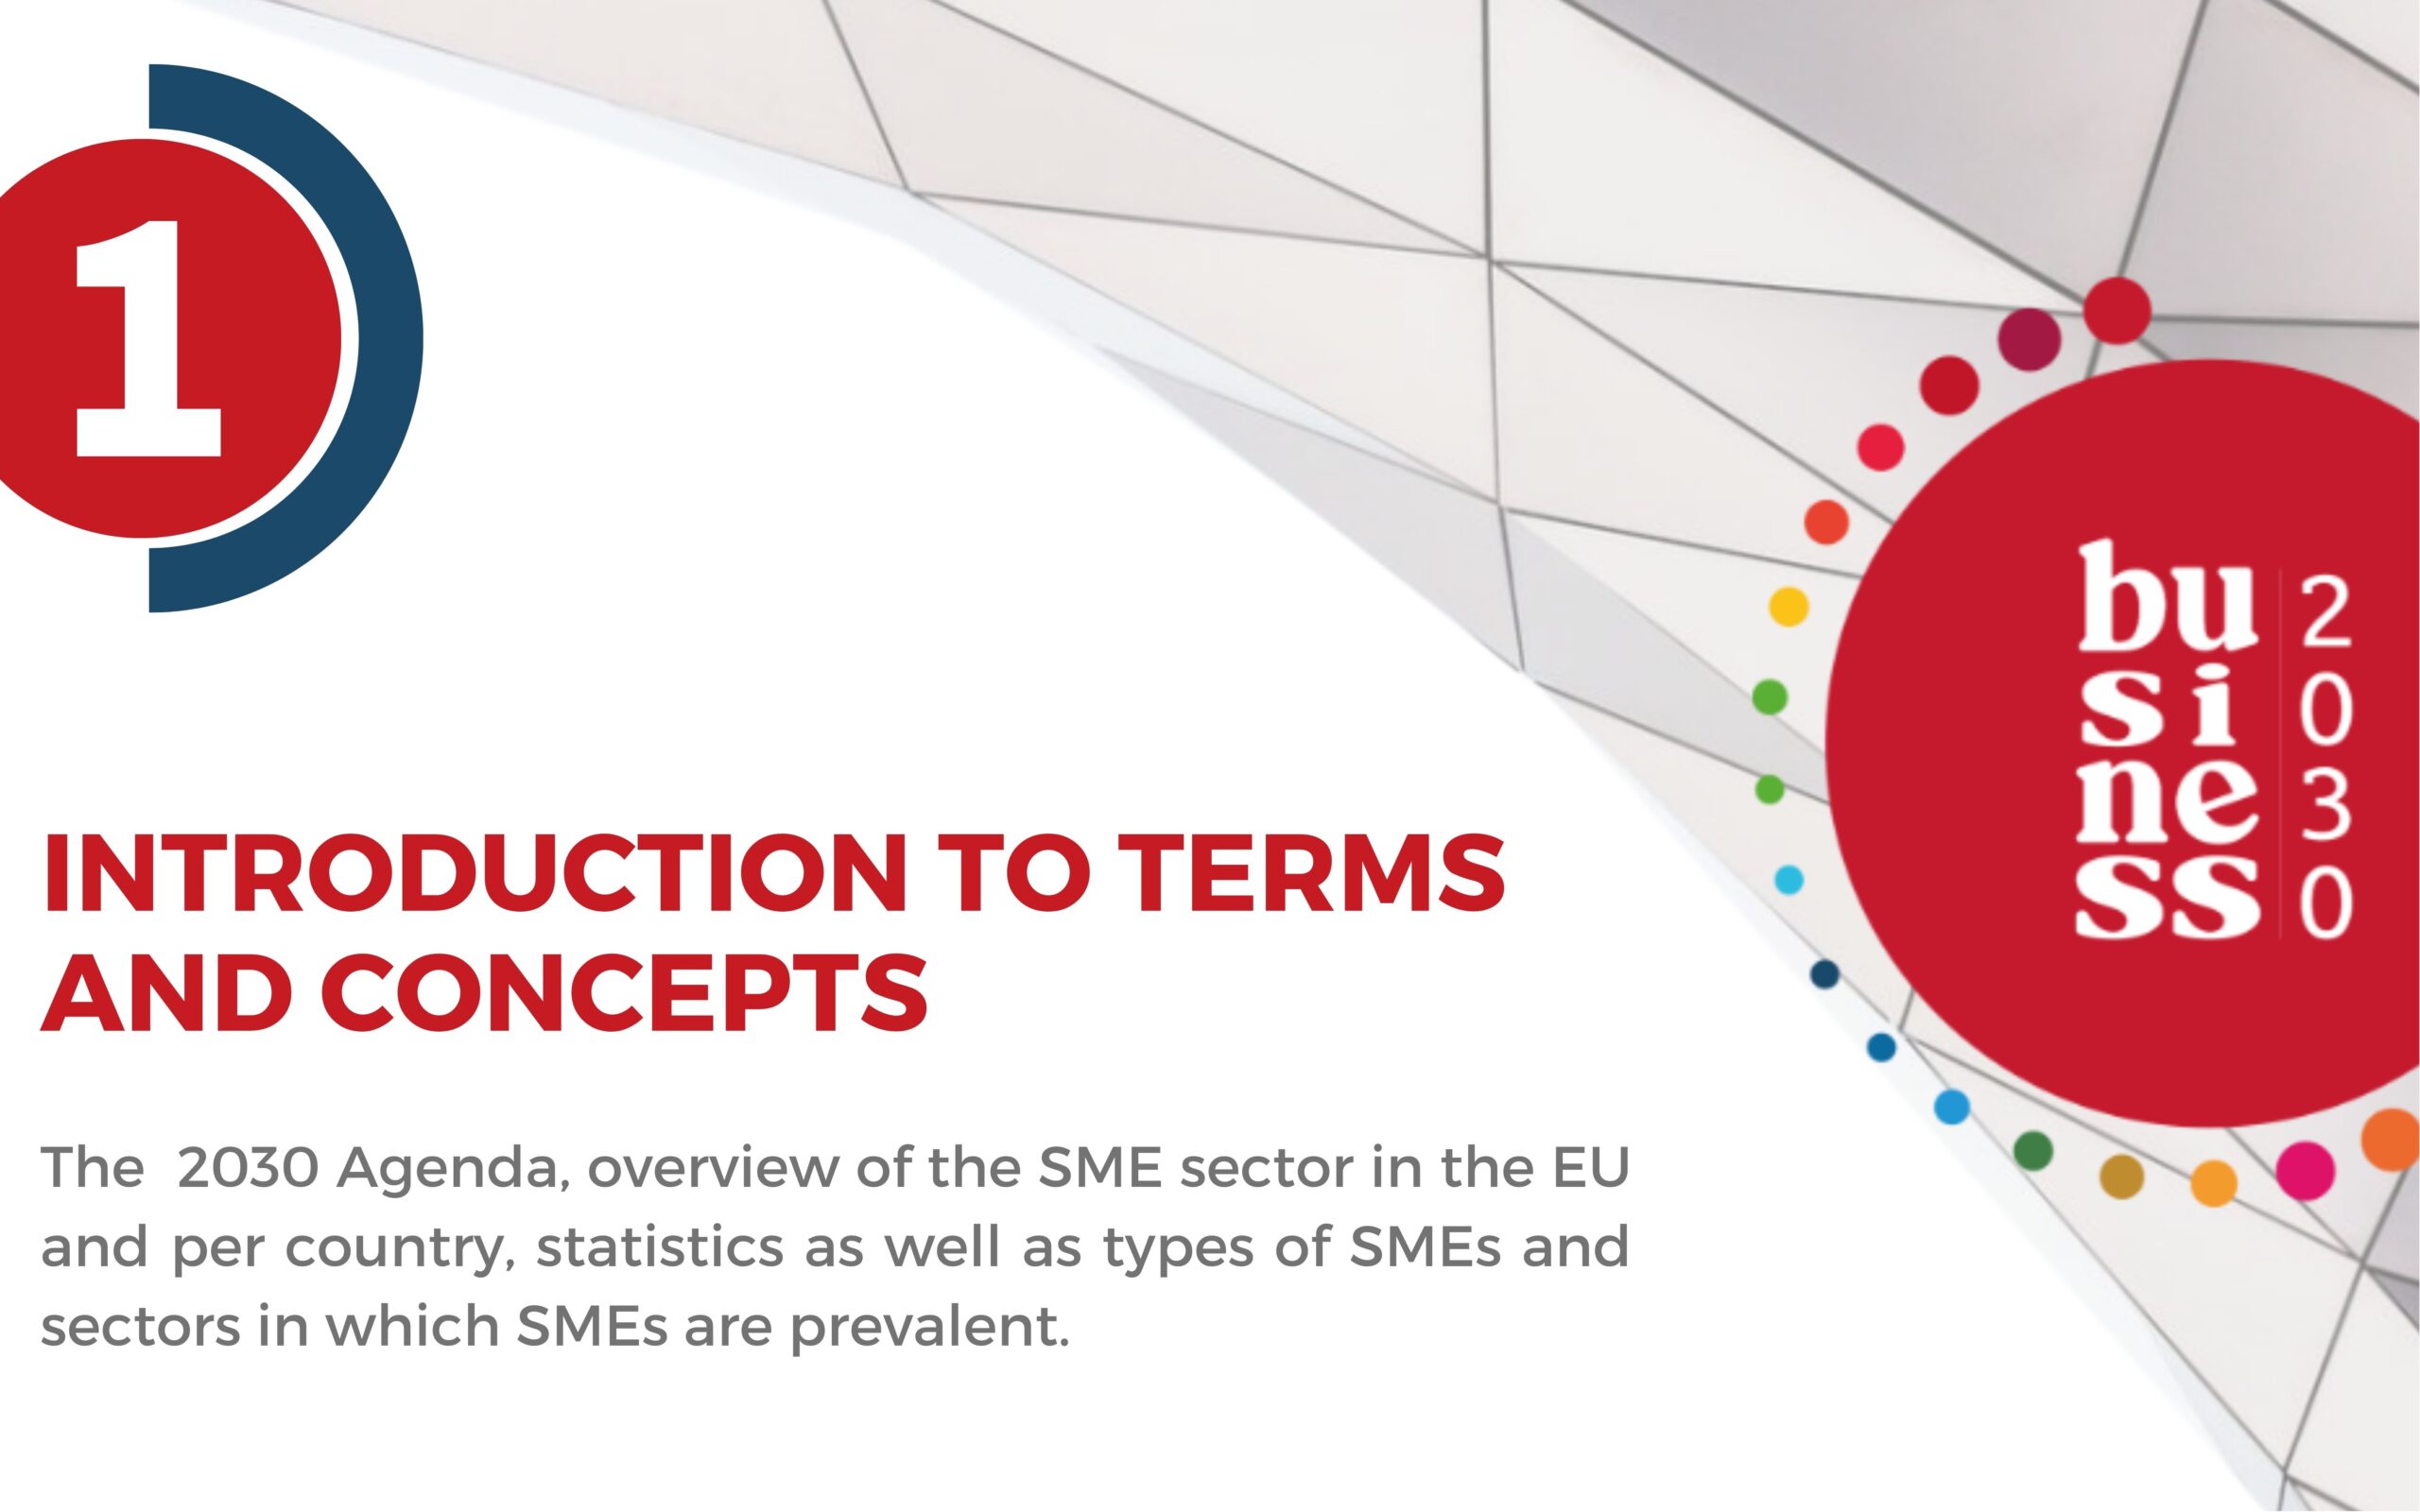 1. The 2030 Agenda and the landscape of SMEs in Europe